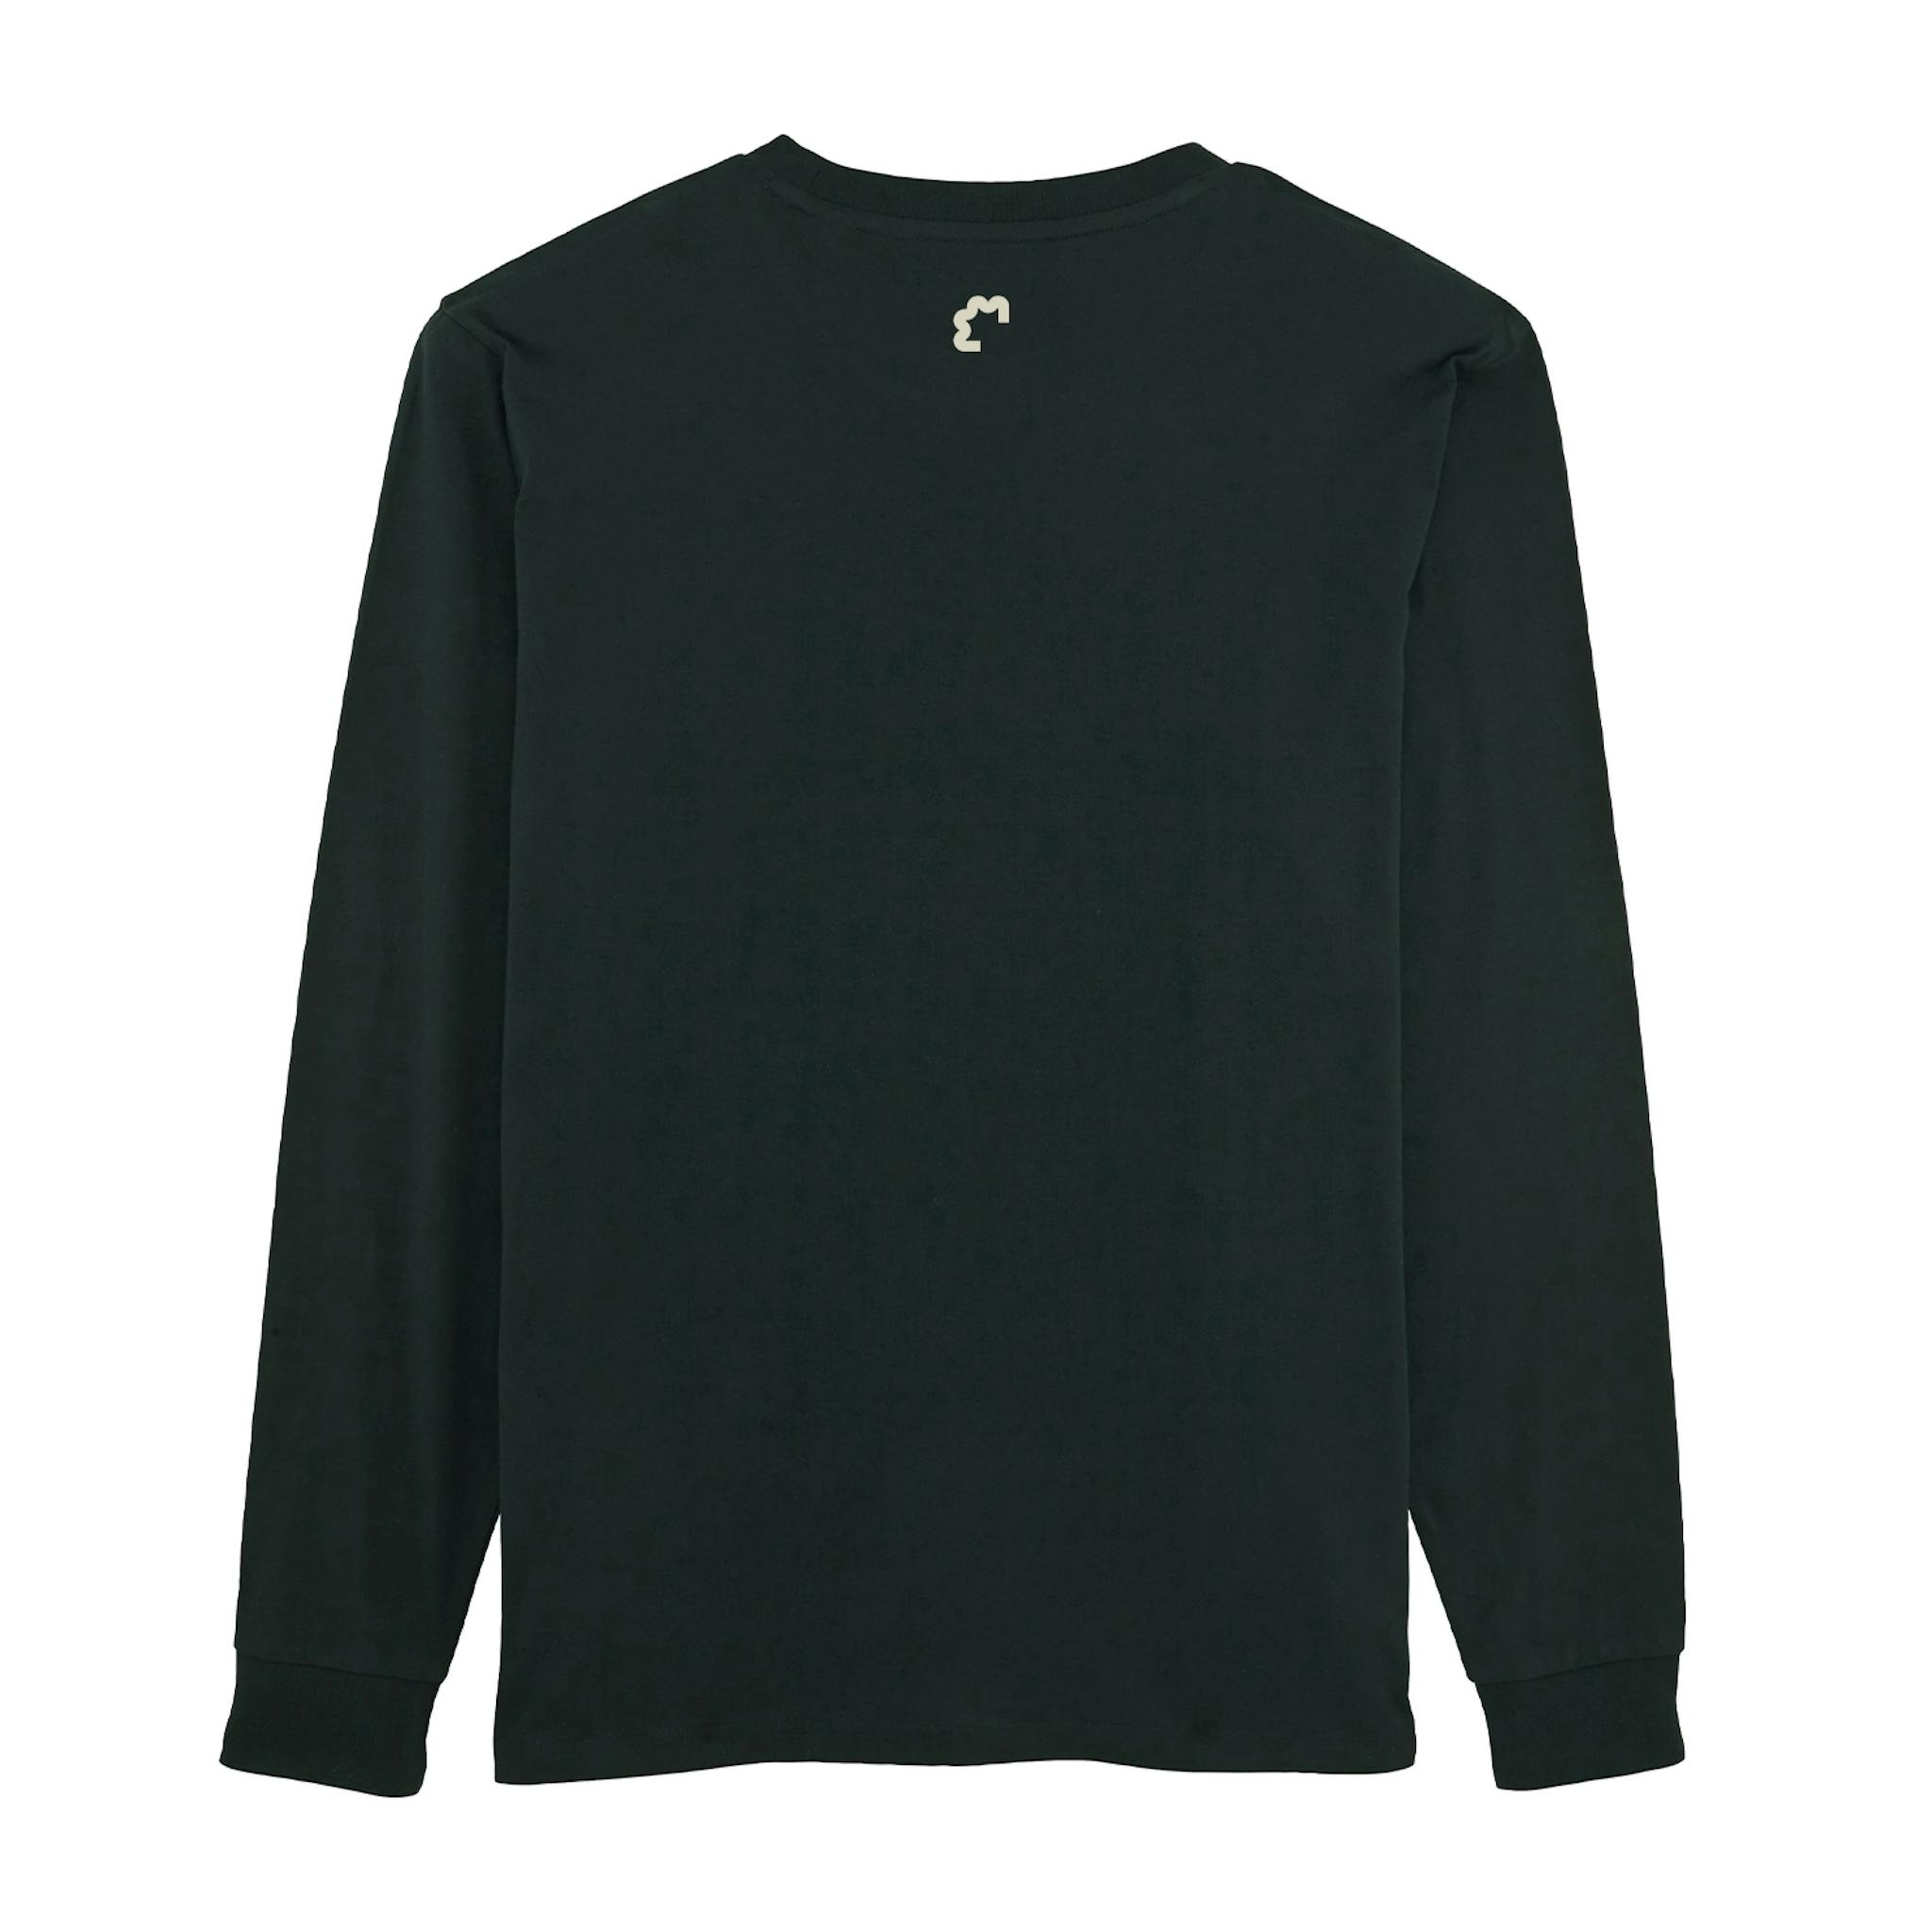 A black long-sleeve T-shirt with a small white logo on the back.